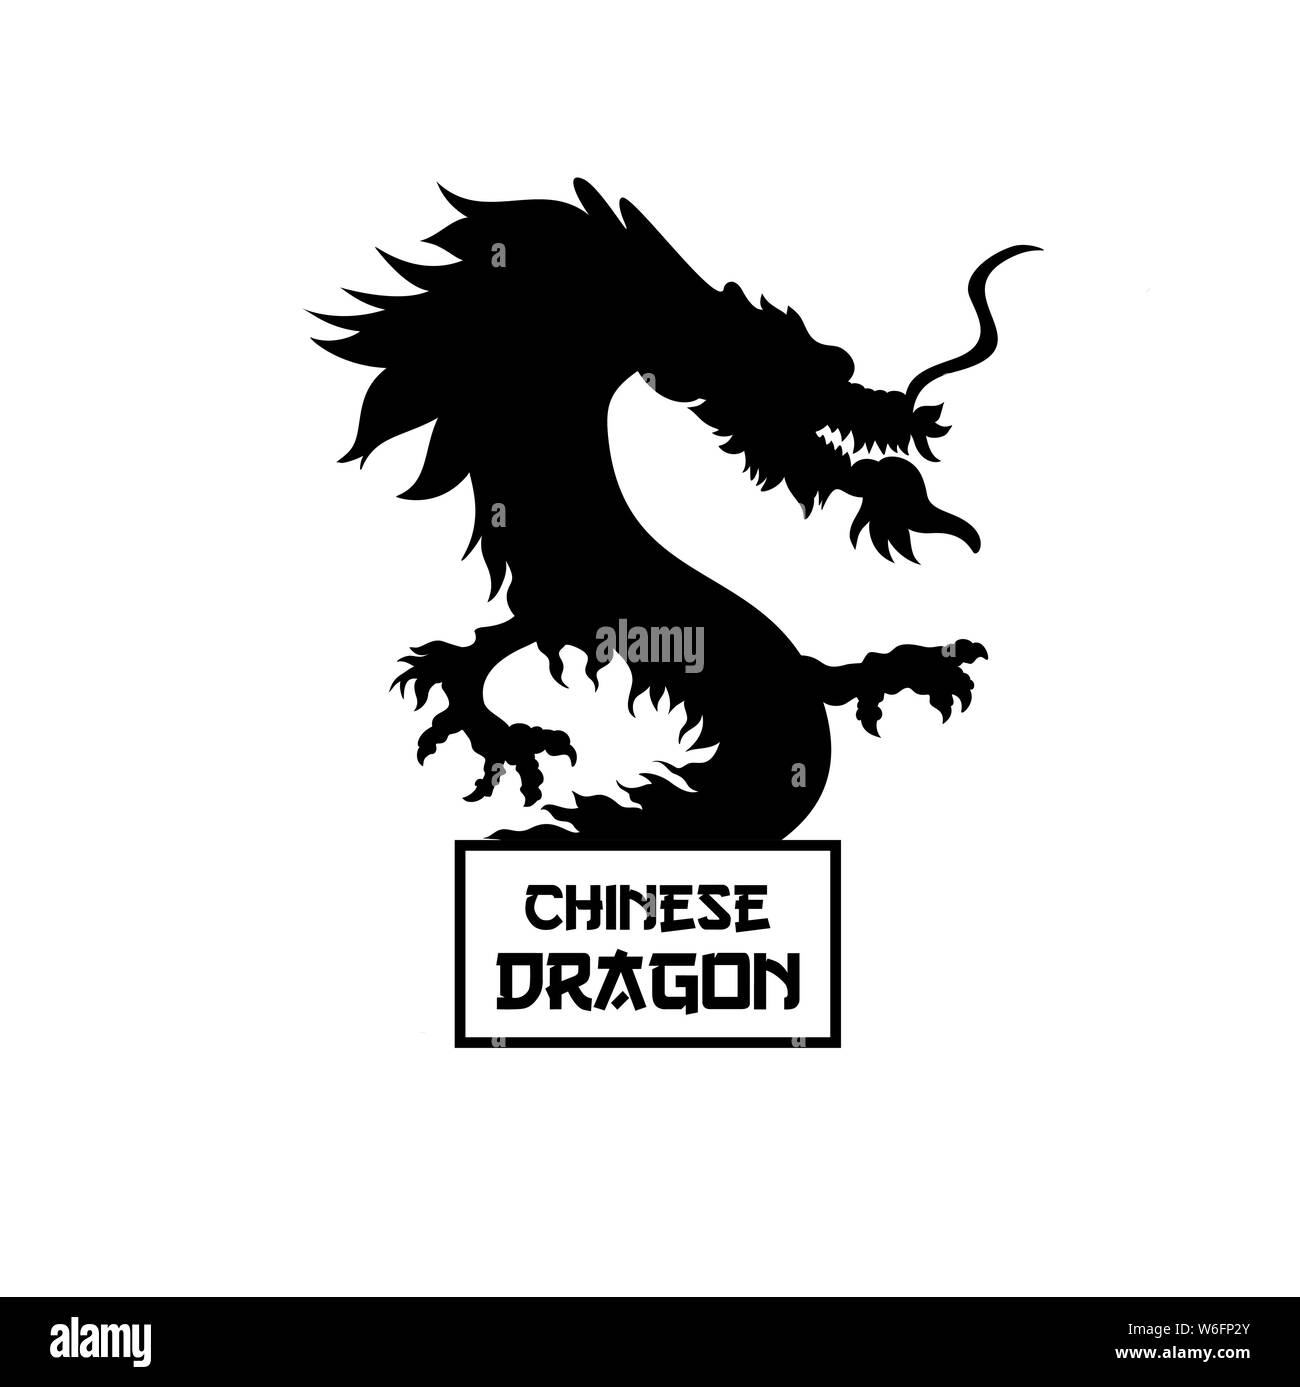 Chinese dragon black silhouette vector illustration. Traditional Chinese mythological creature. Legendary serpent monochrome sketch with stylized lettering in frame. Oriental New Year poster, postcard Stock Vector